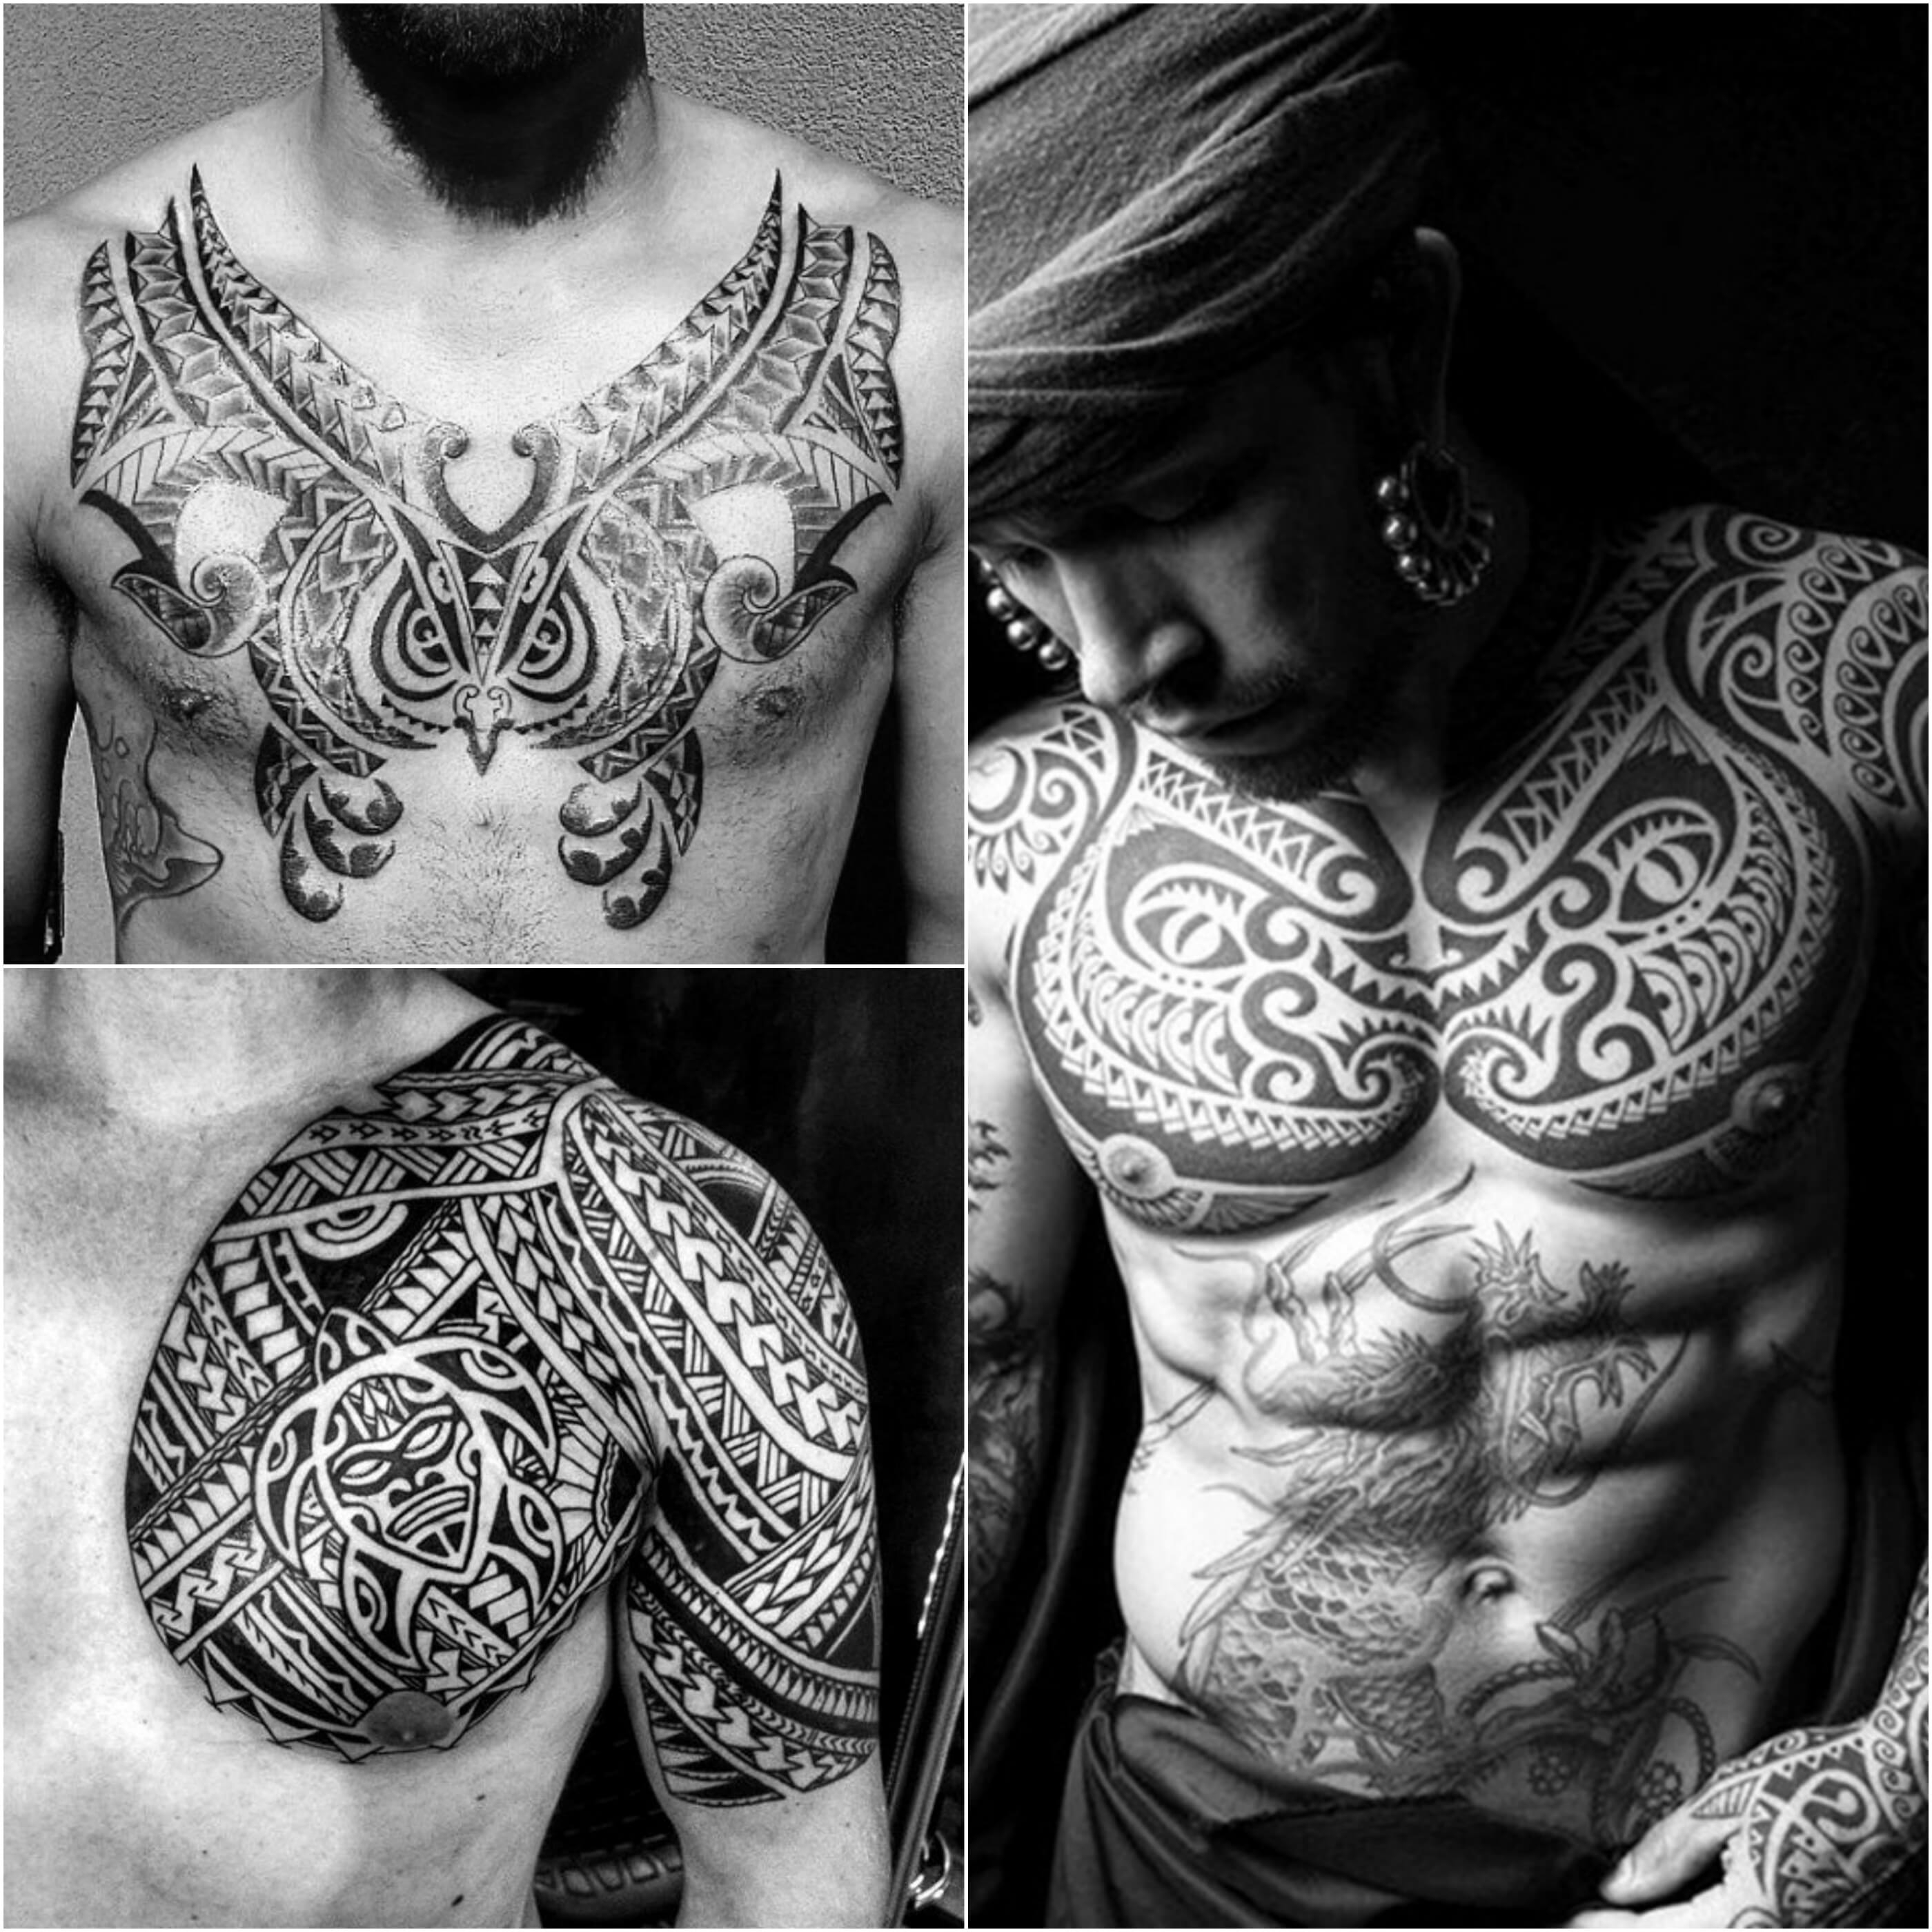 100 Best Chest Tattoos For Men Chest Tattoo Gallery For Men intended for sizing 2800 X 2800